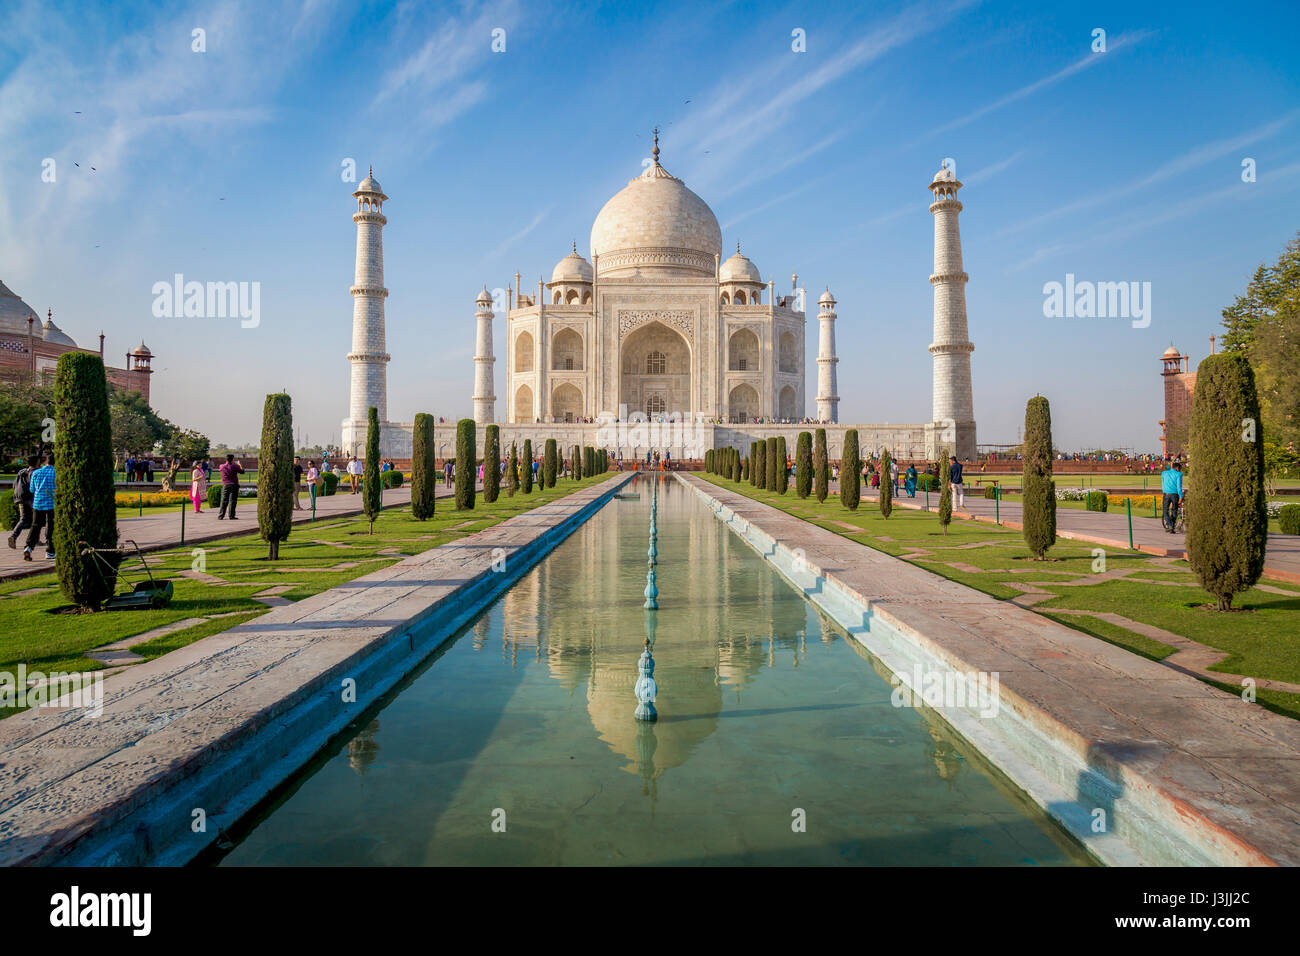 Taj Mahal white marble mausoleum built by emperor Shahjahan bears the heritage of Indian Mughal architecture. A UNESCO World heritage site. Stock Photo